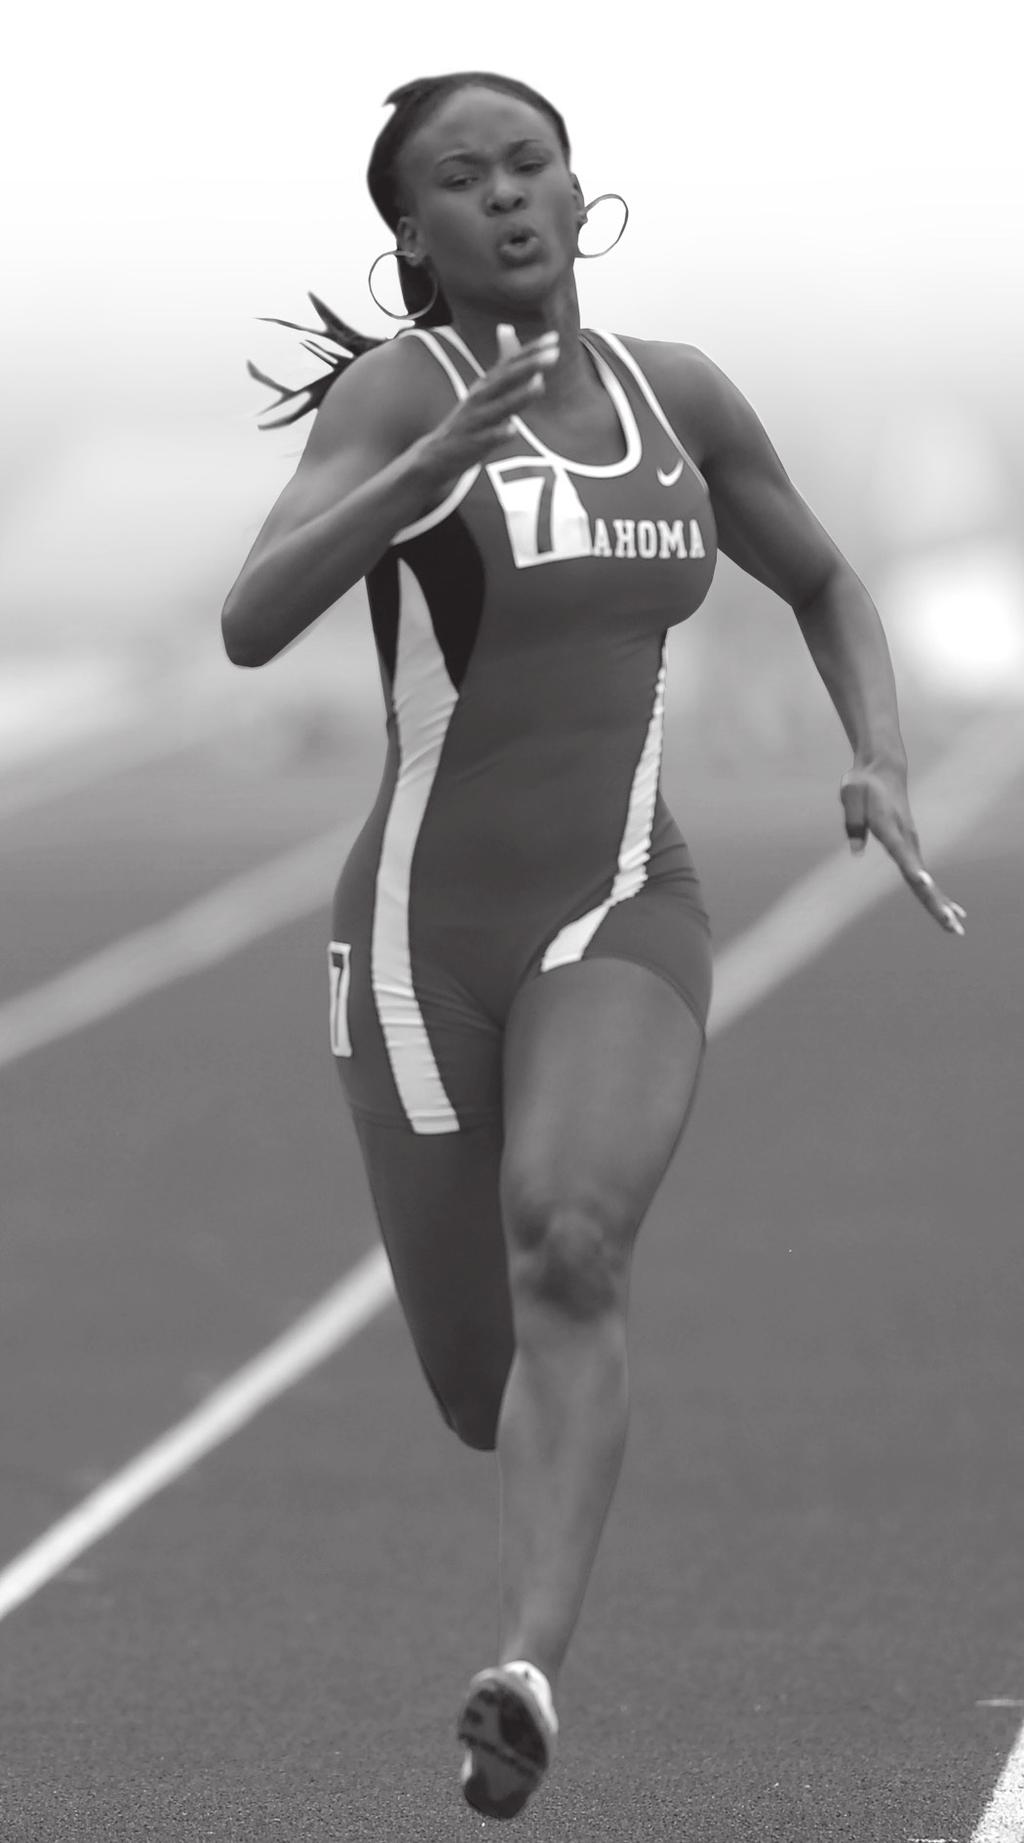 36) 2008 All-Big 12 Conference (Outdoor 100, 200, 4x100, long jump) 2008 All-Big 12 Conference (Indoor 60, long jump) 2007 NCAA All-American (Outdoor 4x100) 2007 Big 12 Champion (Outdoor long jump